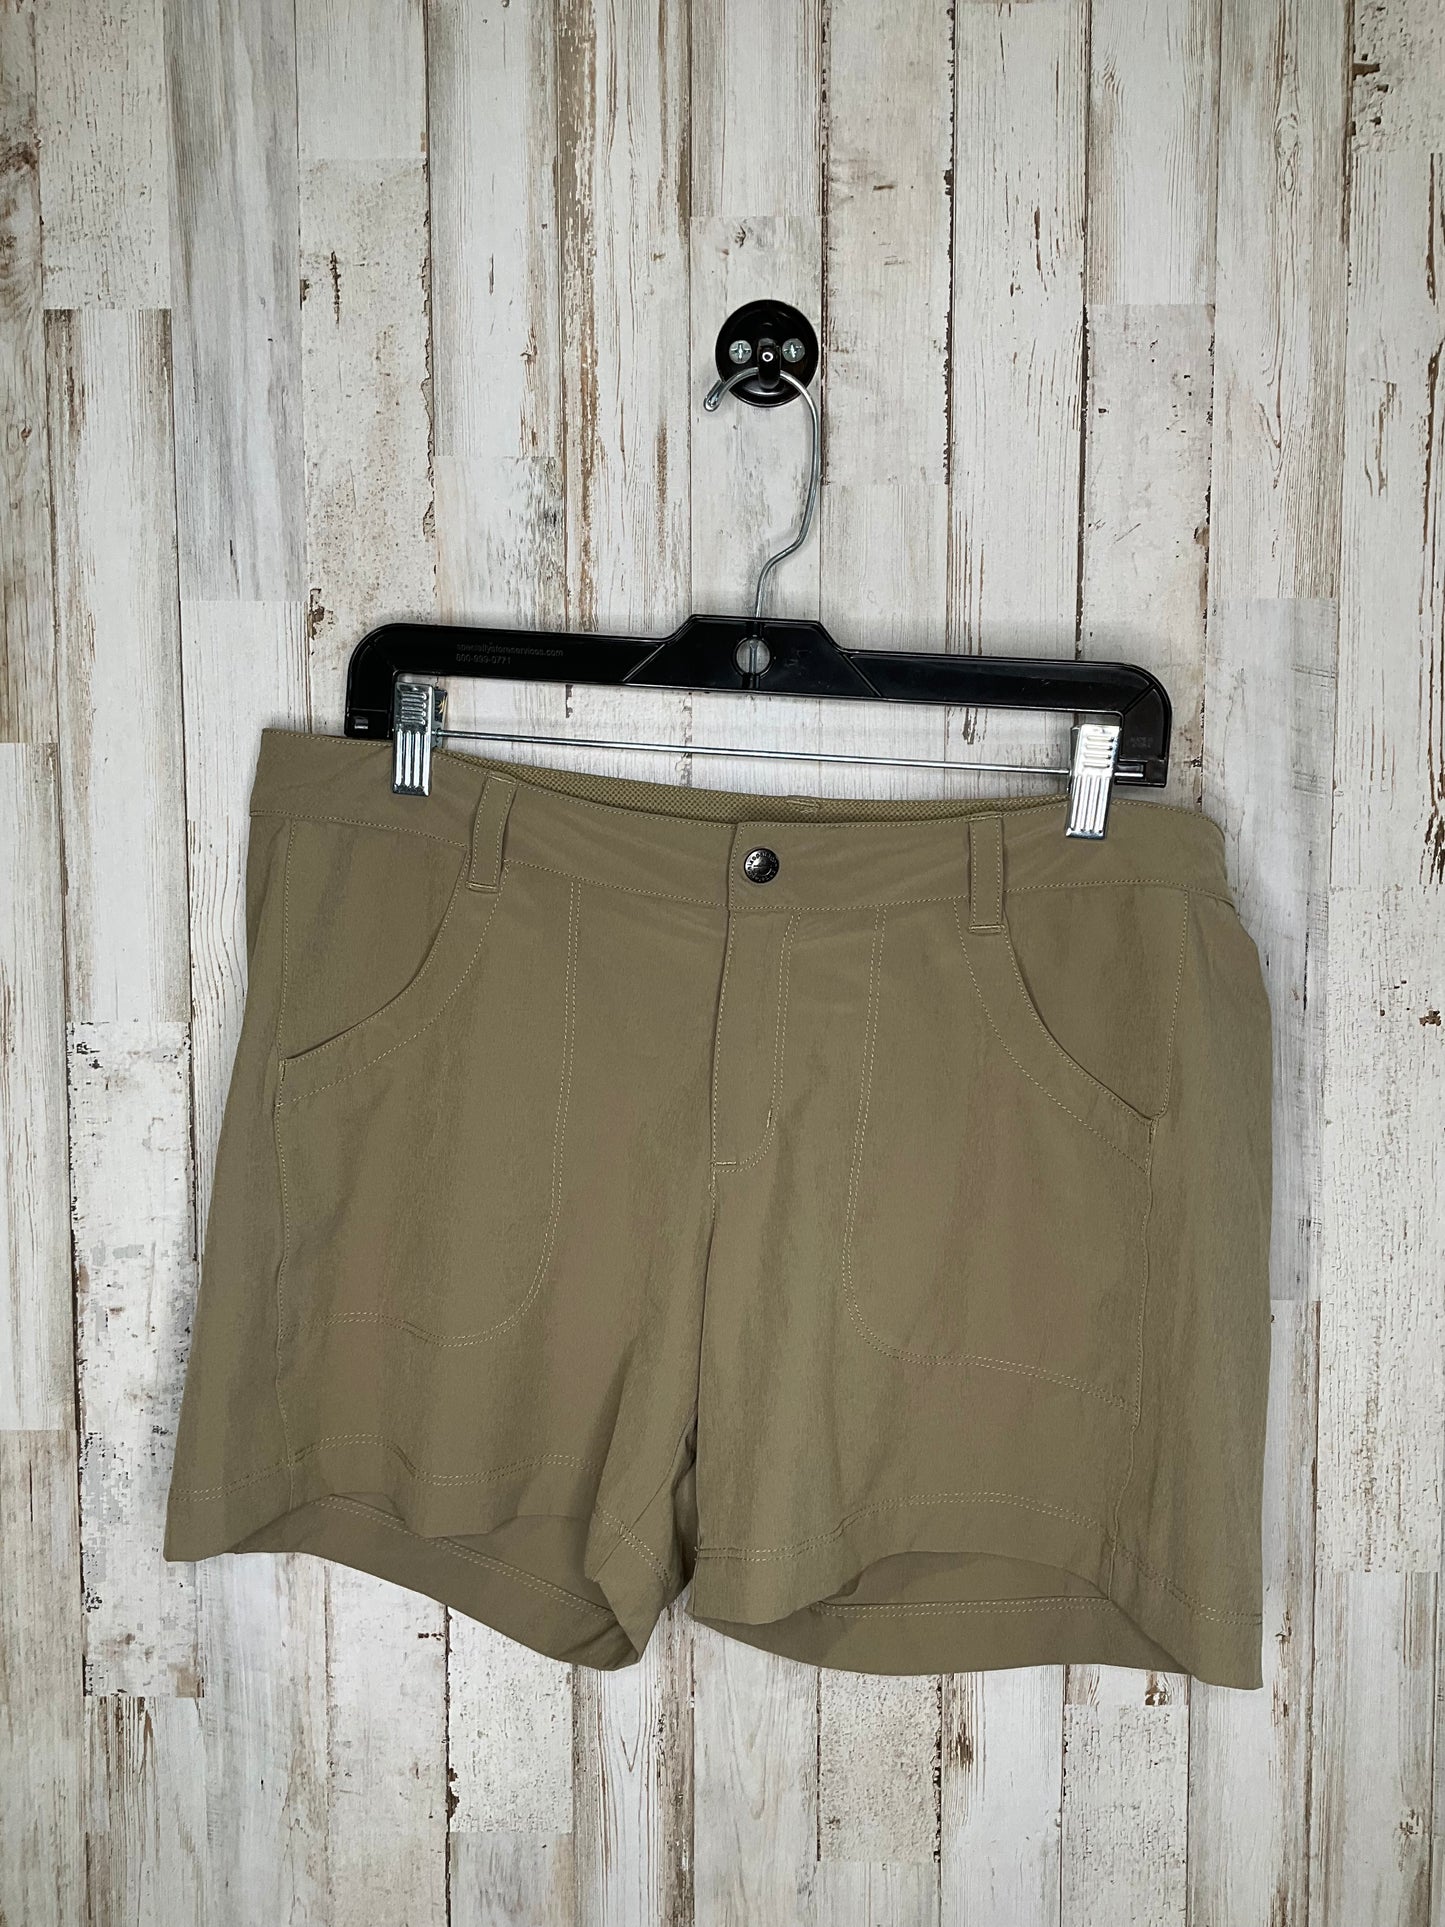 Shorts By Patagonia  Size: 12